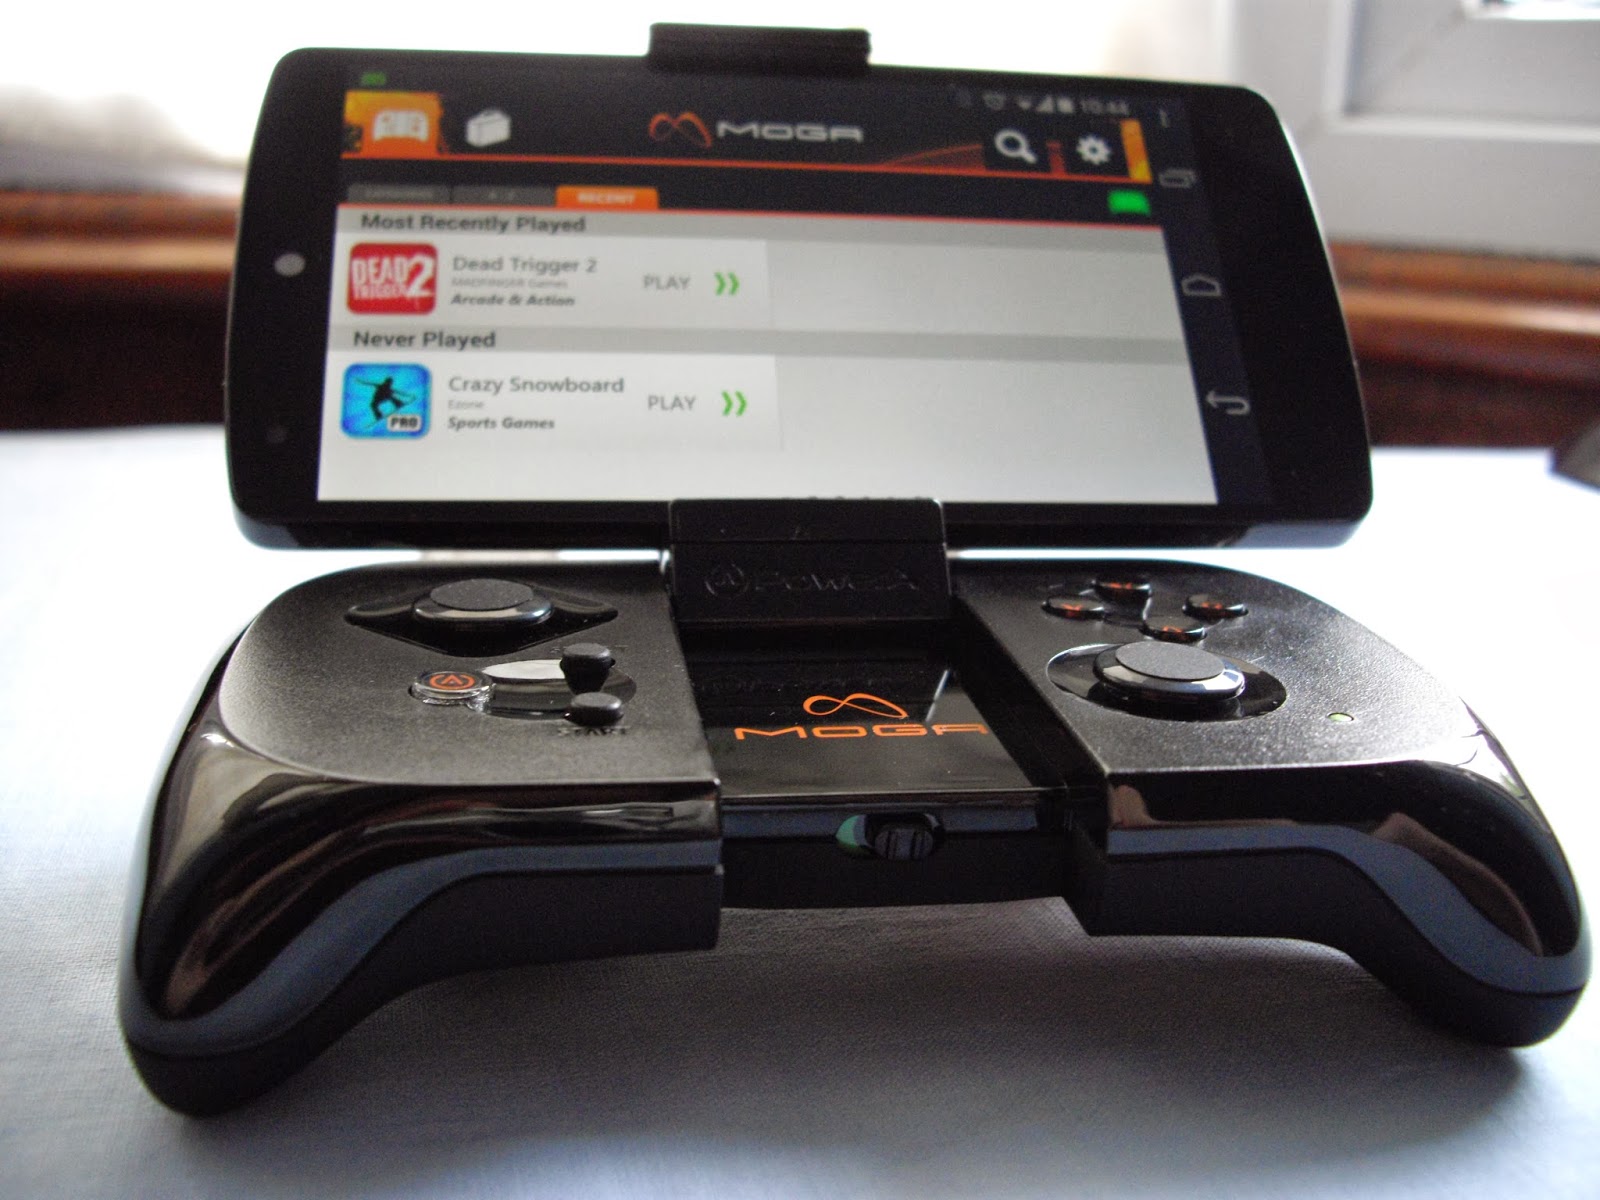 Max Payne Mobile gamepad-enabled game review